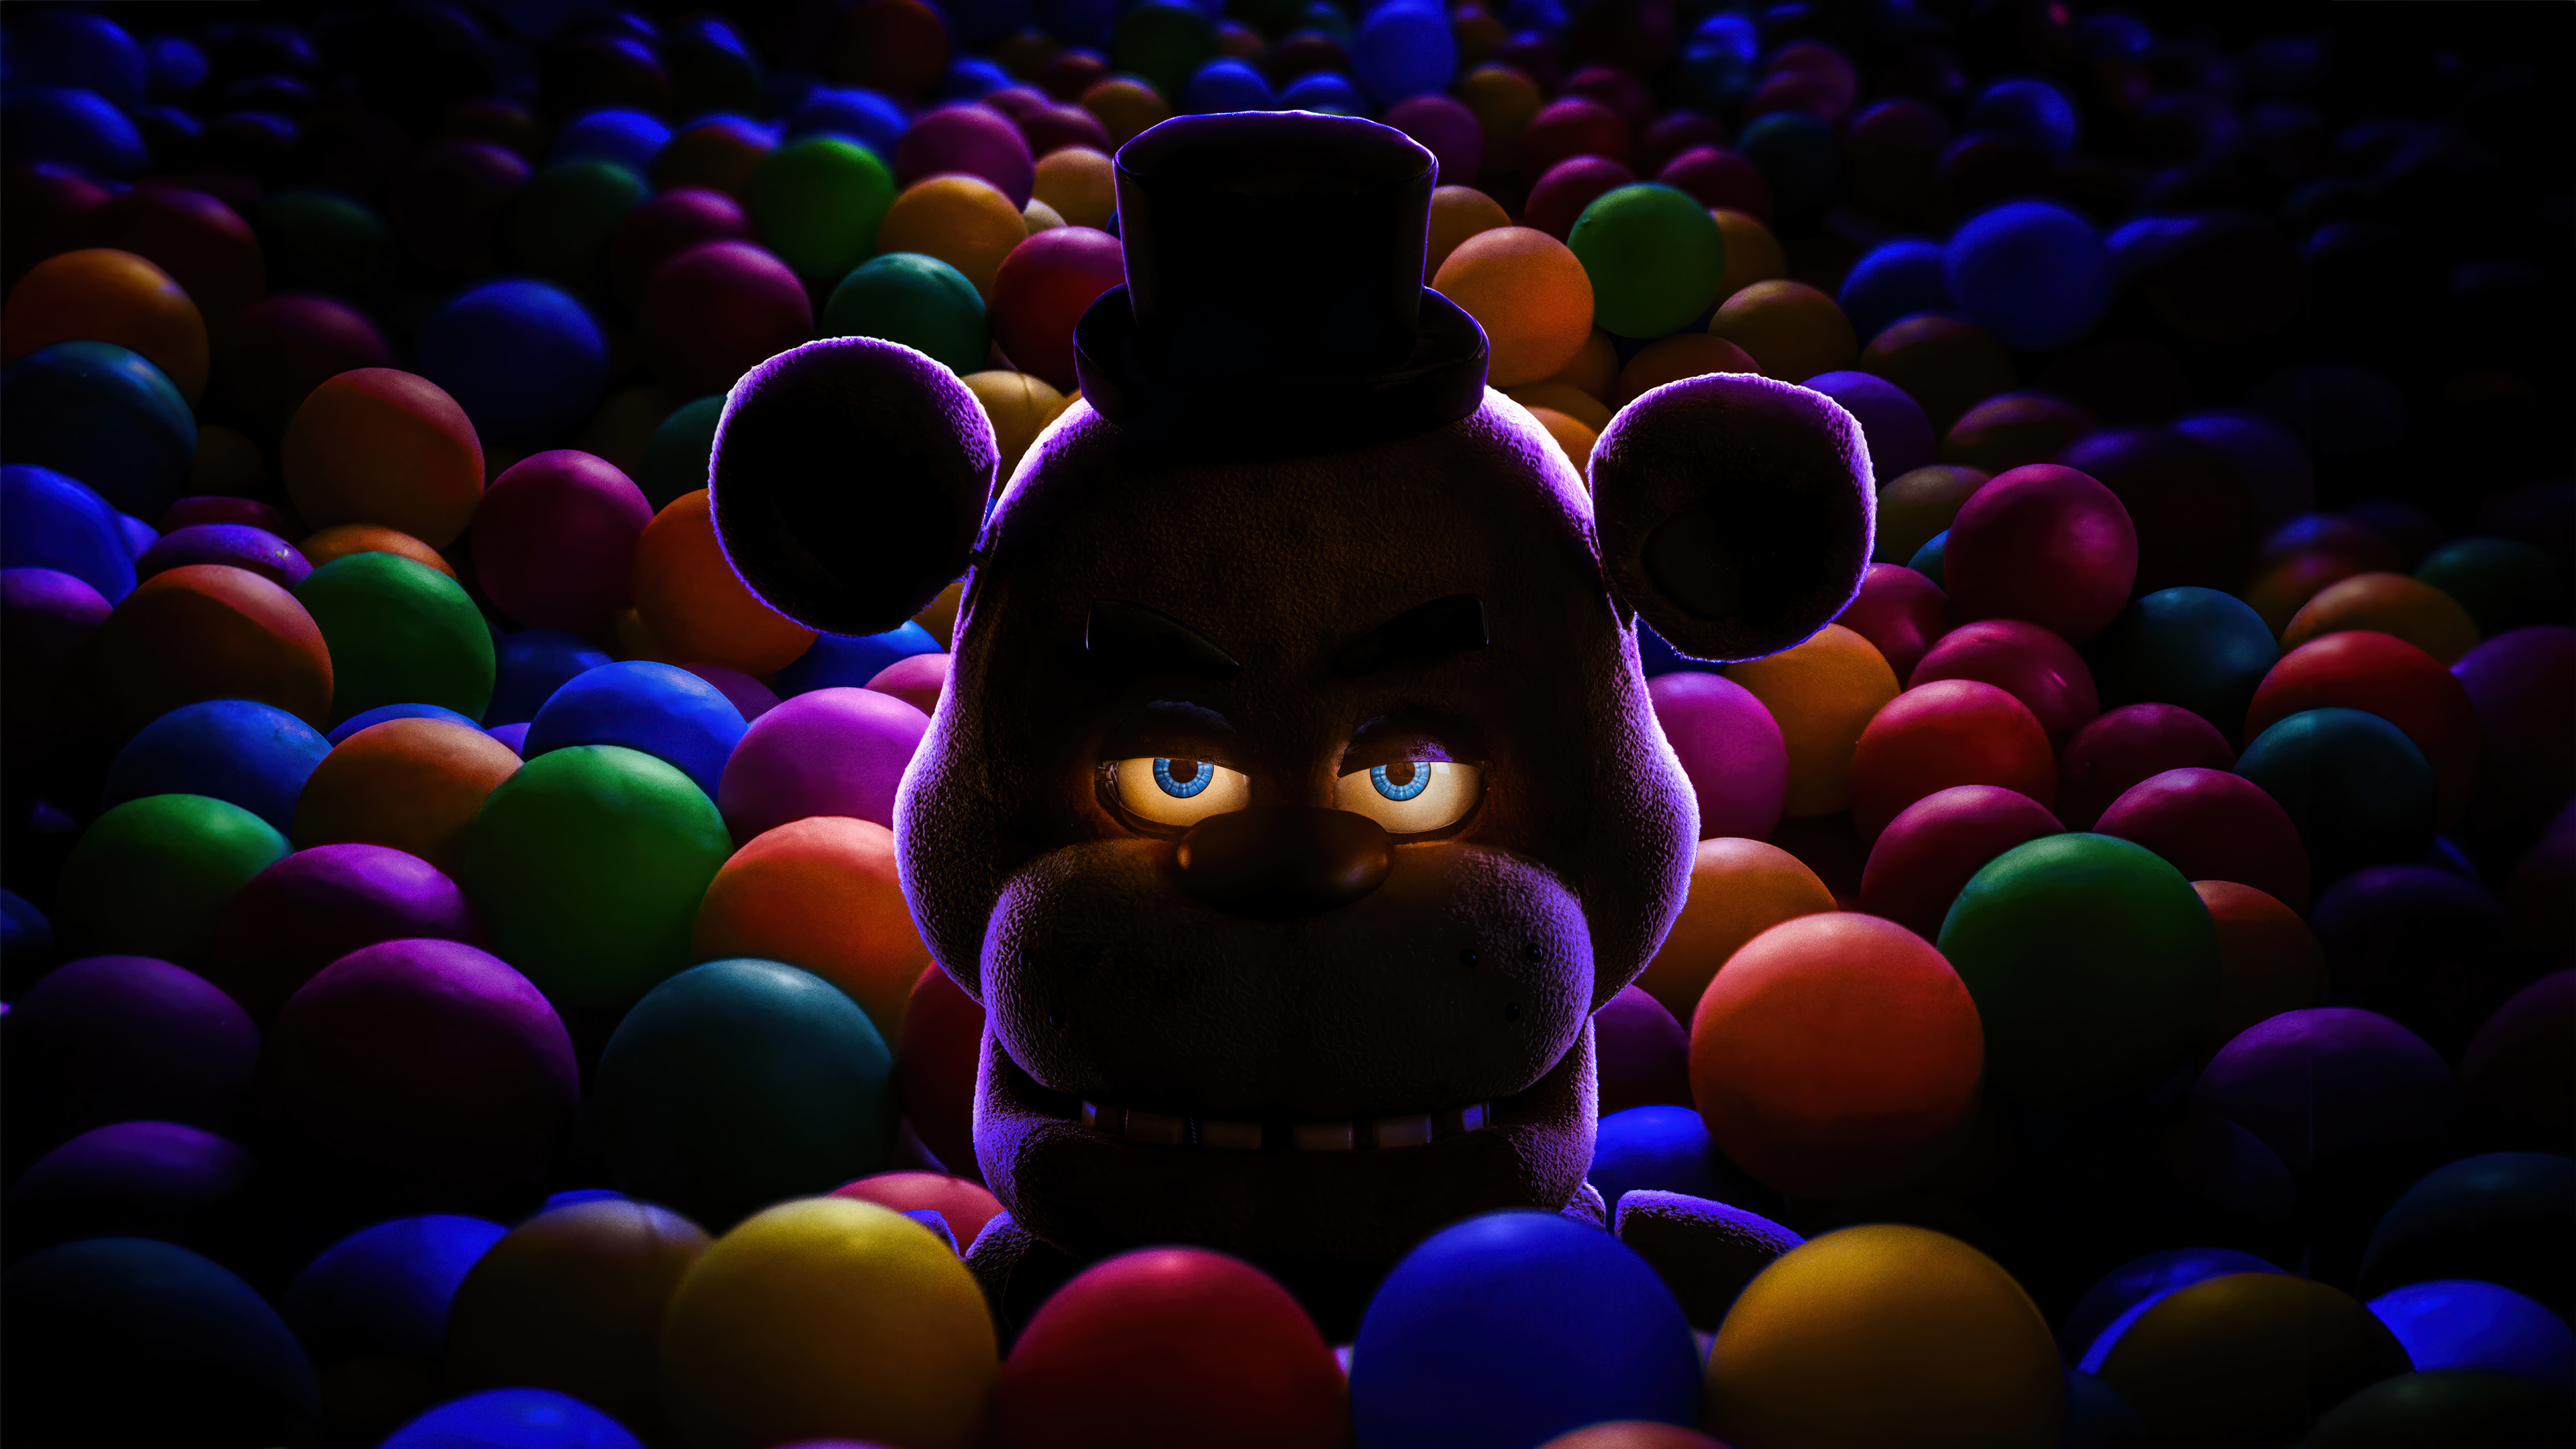 HD desktop wallpaper of Five Nights at Freddy's character peeking out from a colorful ball pit with a sinister expression.